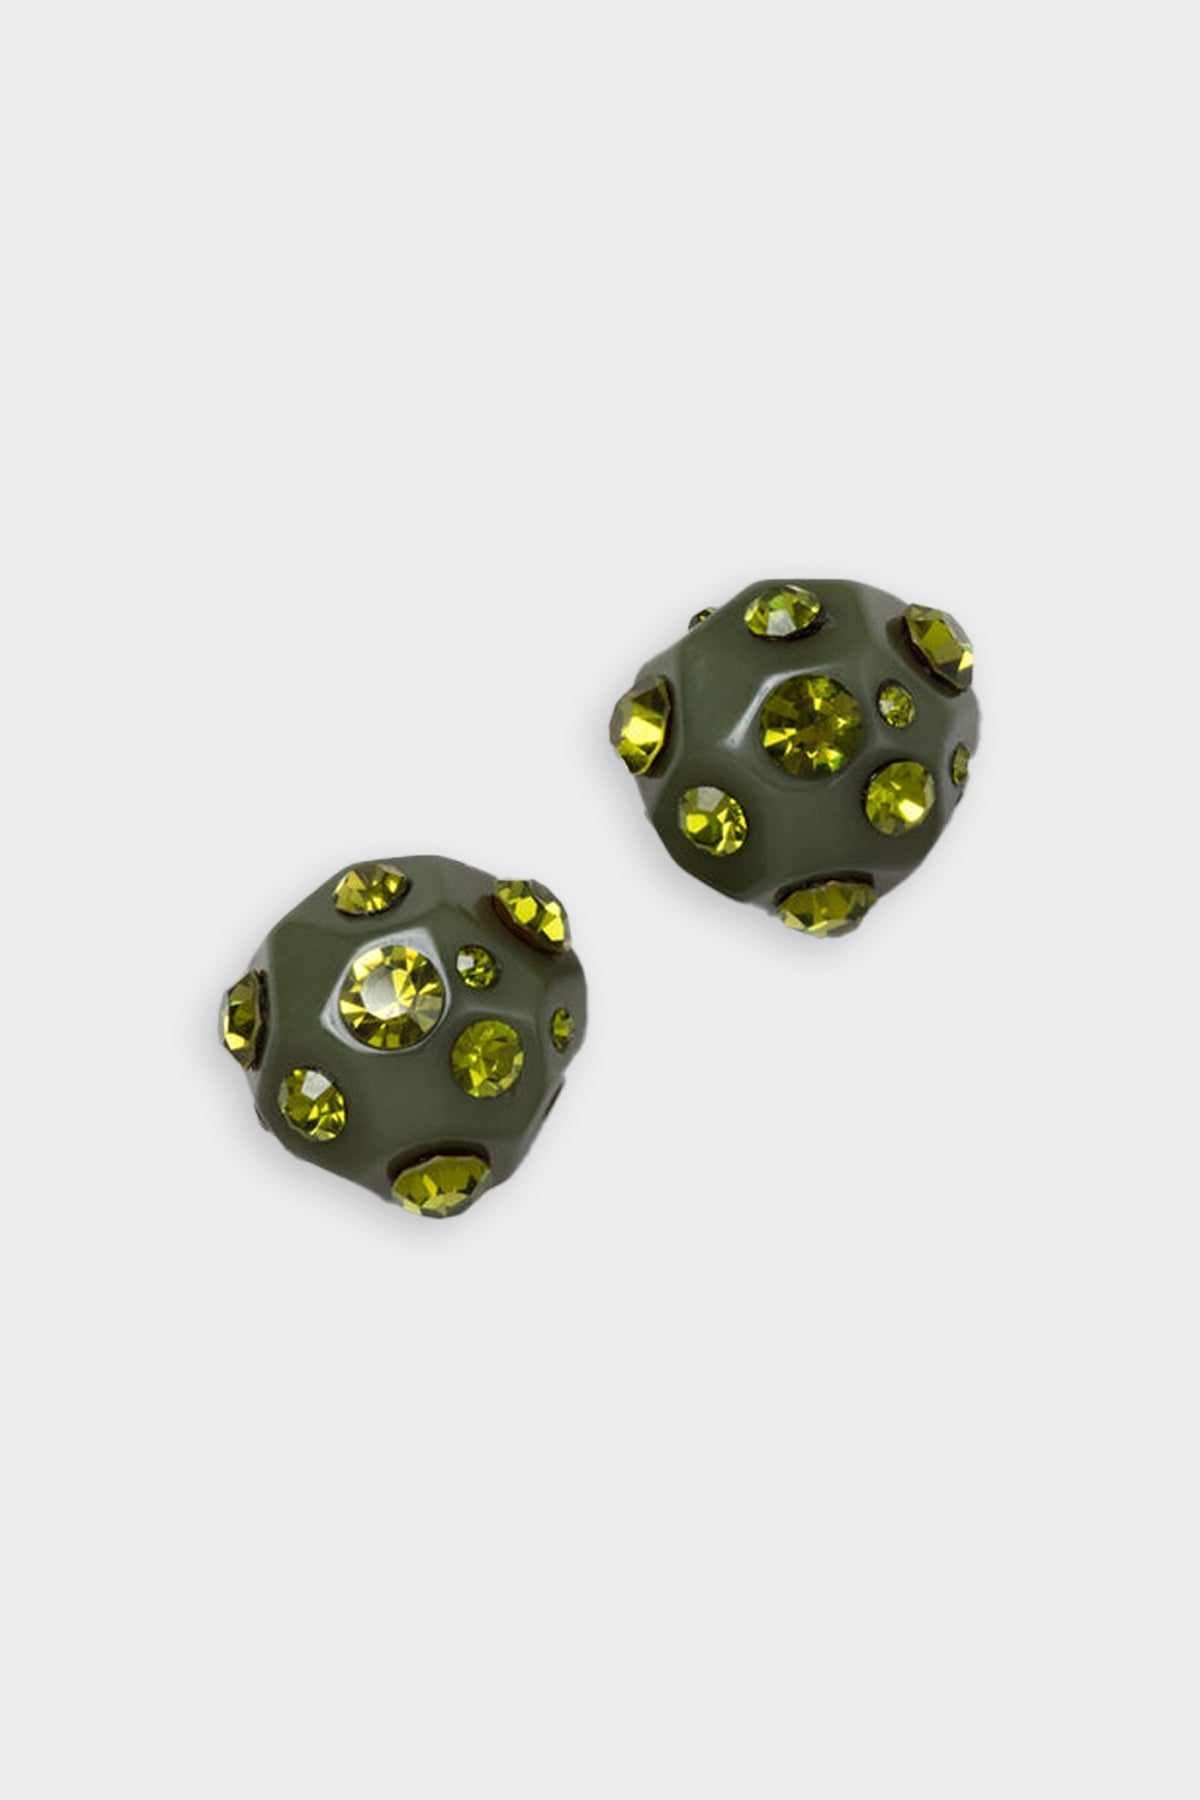 Gallo Clip-On Earrings in Olive - shop-olivia.com